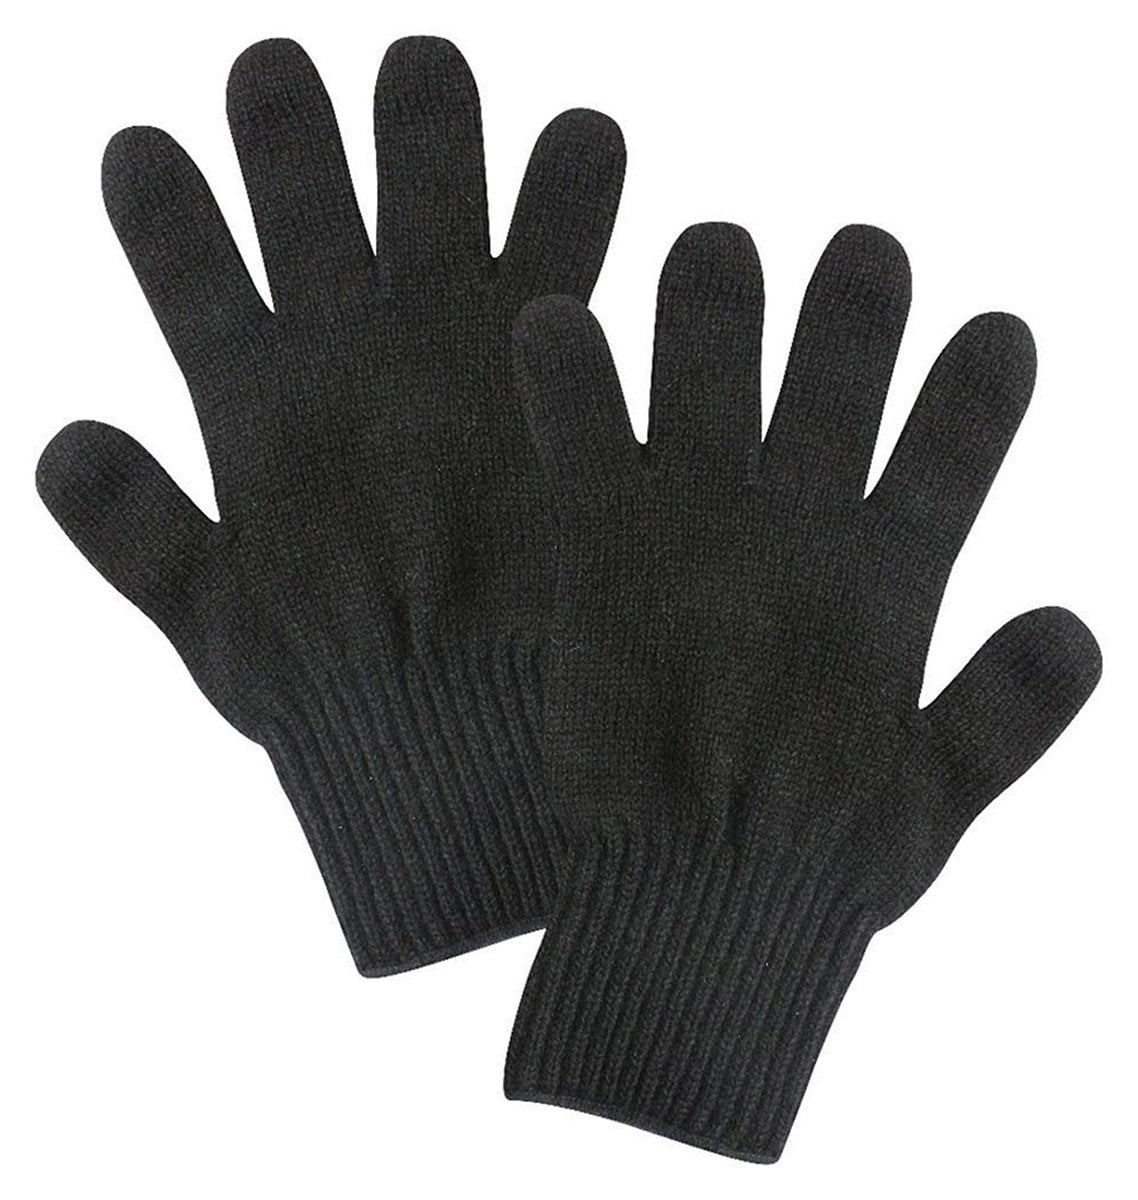 Rothco US Military Coyote G.I Glove Liners 